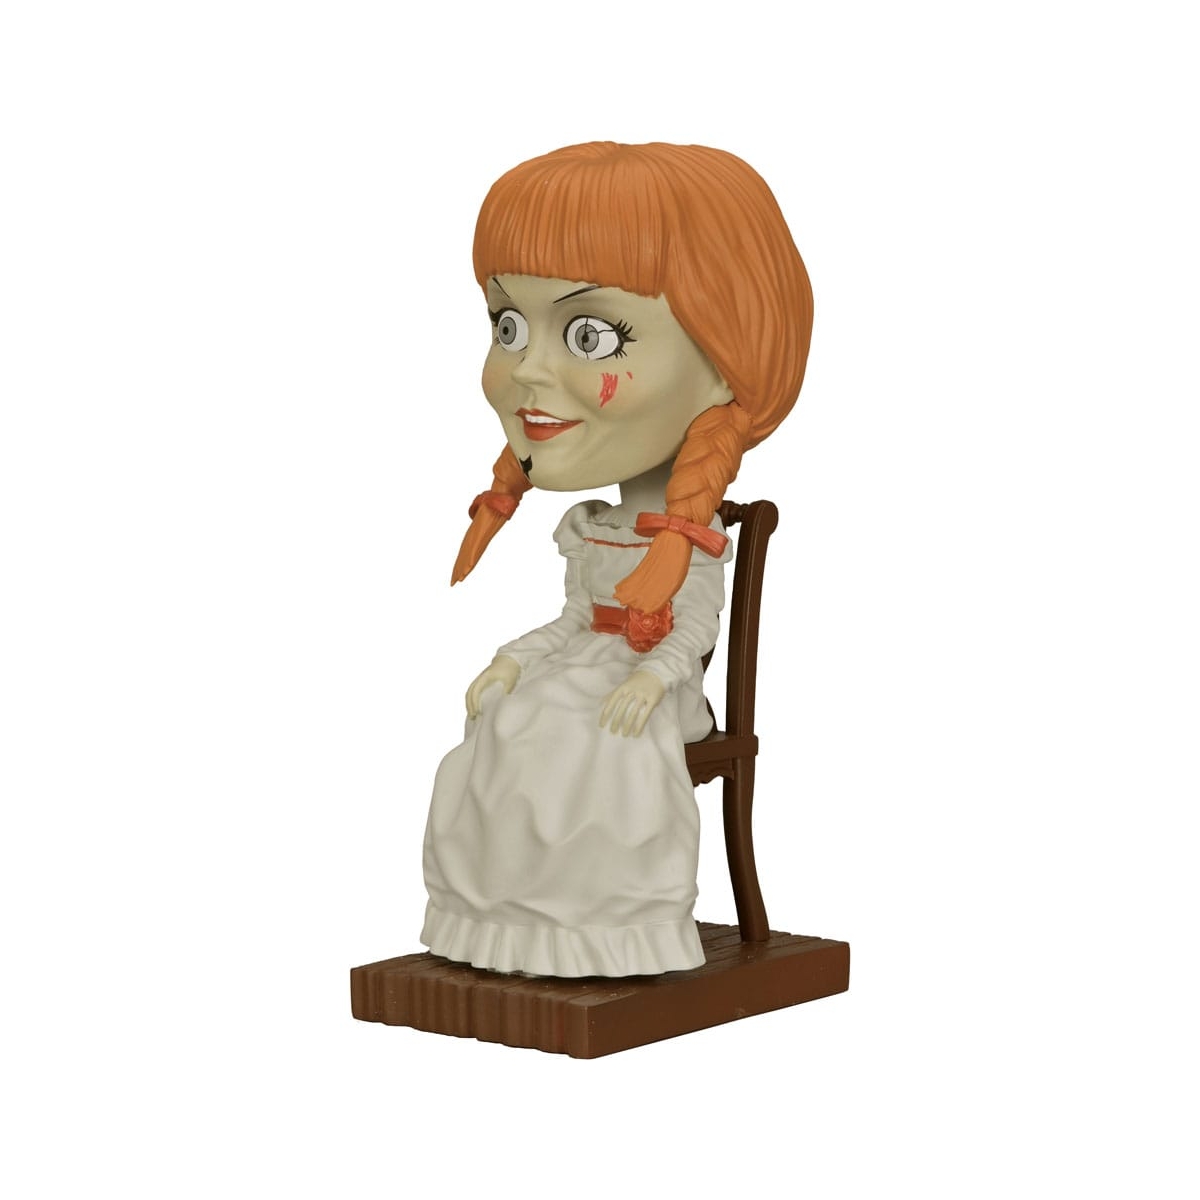 Acheter The Conjuring - Figurine d'Annabelle (Annabelle) - Figurines prix  promo neuf et occasion pas cher